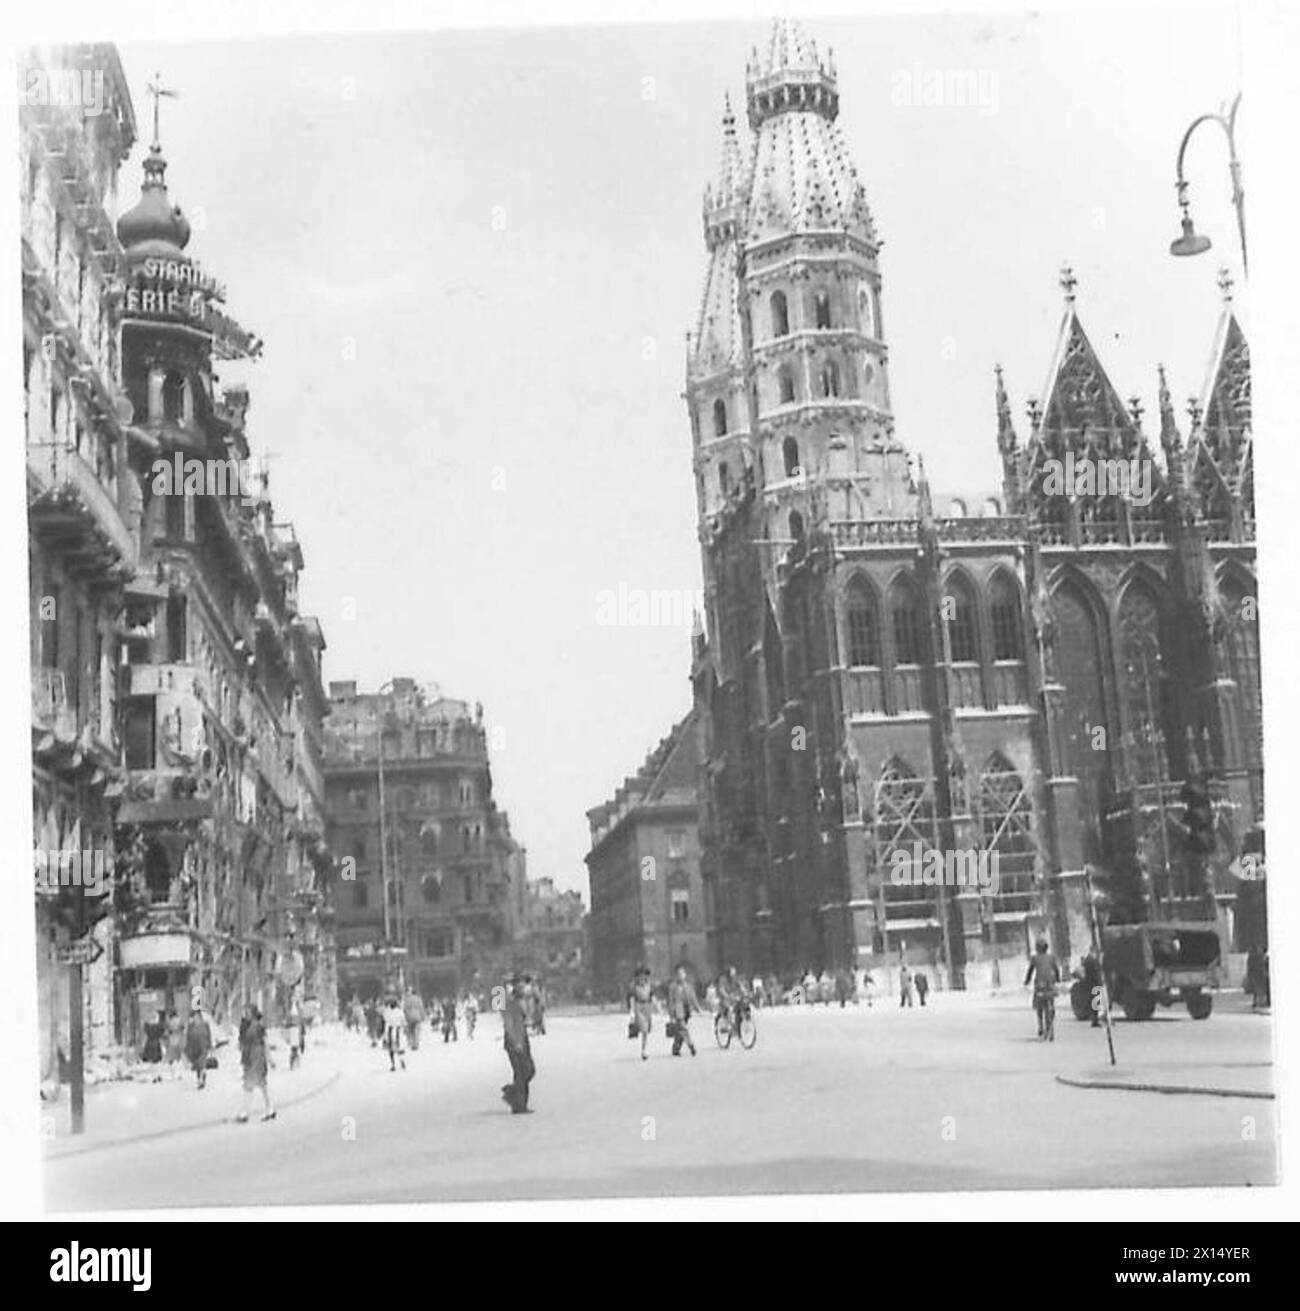 VIENNA : YESTERDAY AND TODAY - Rotenturn Strasse : On the right is Stephans Church, which is completely burned out, with only the shell remaining British Army Stock Photo